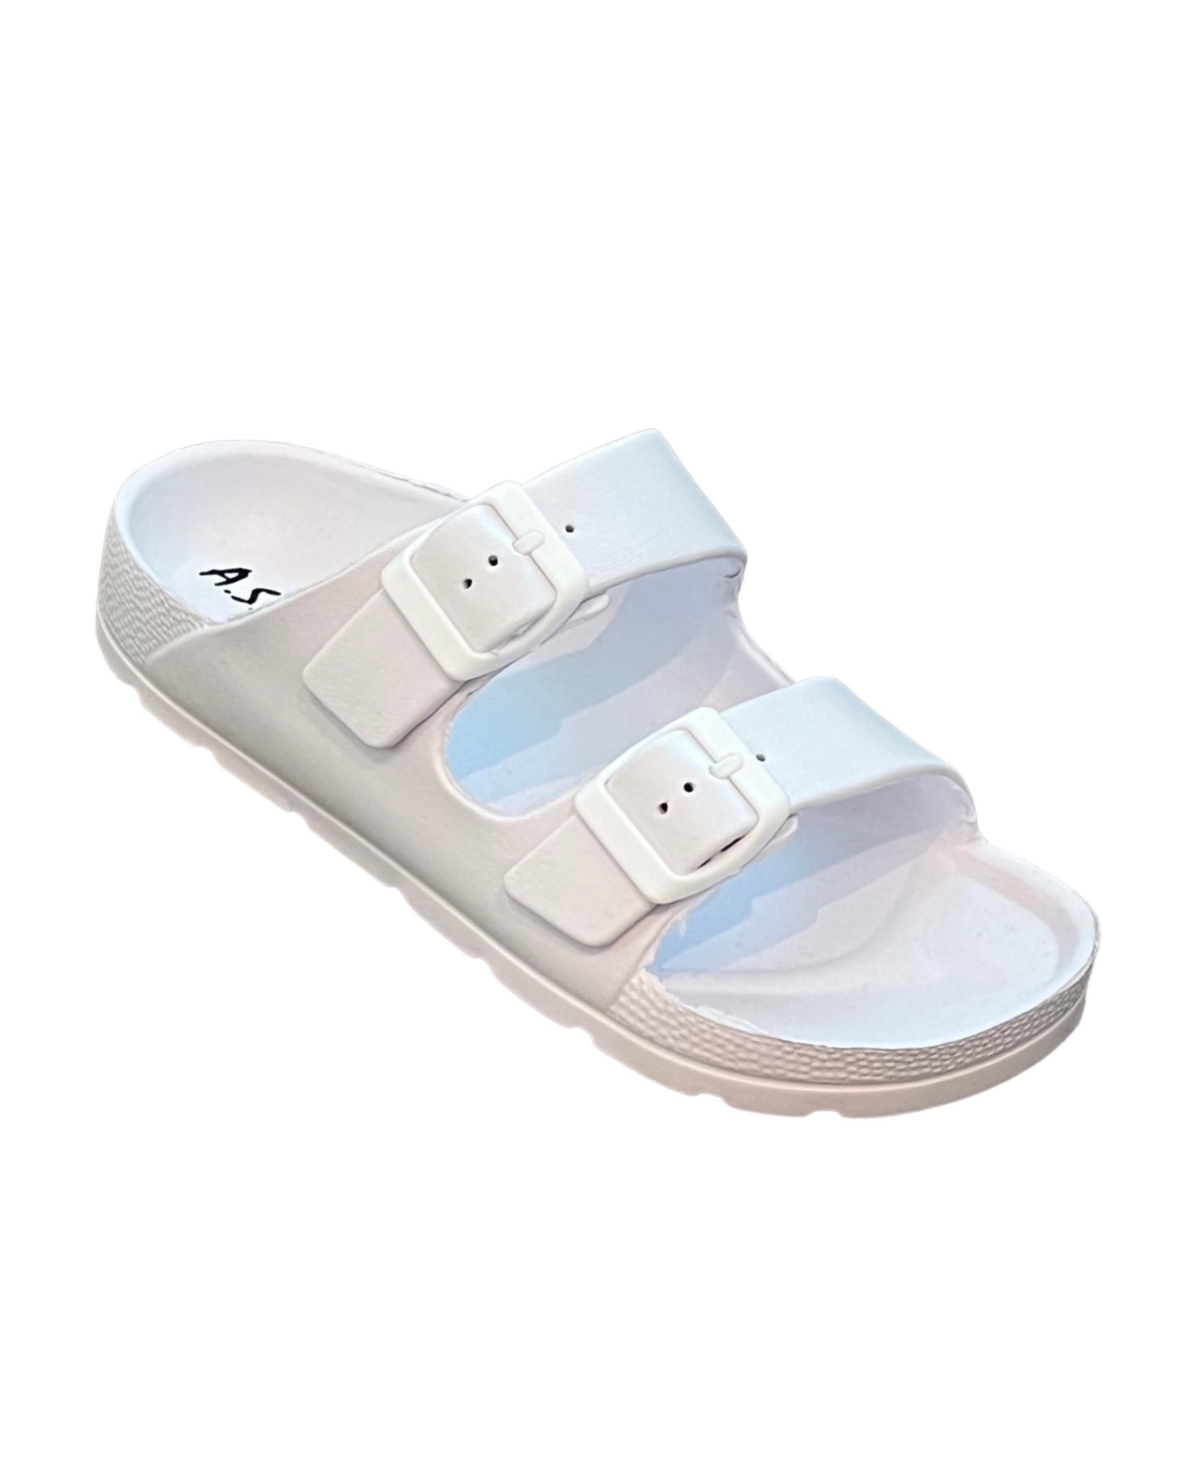 ANDREW BY ANDREW STEVENS COMFORT SLIDES DOUBLE BUCKLE ADJUSTABLE SCOOBY FLAT SANDALS